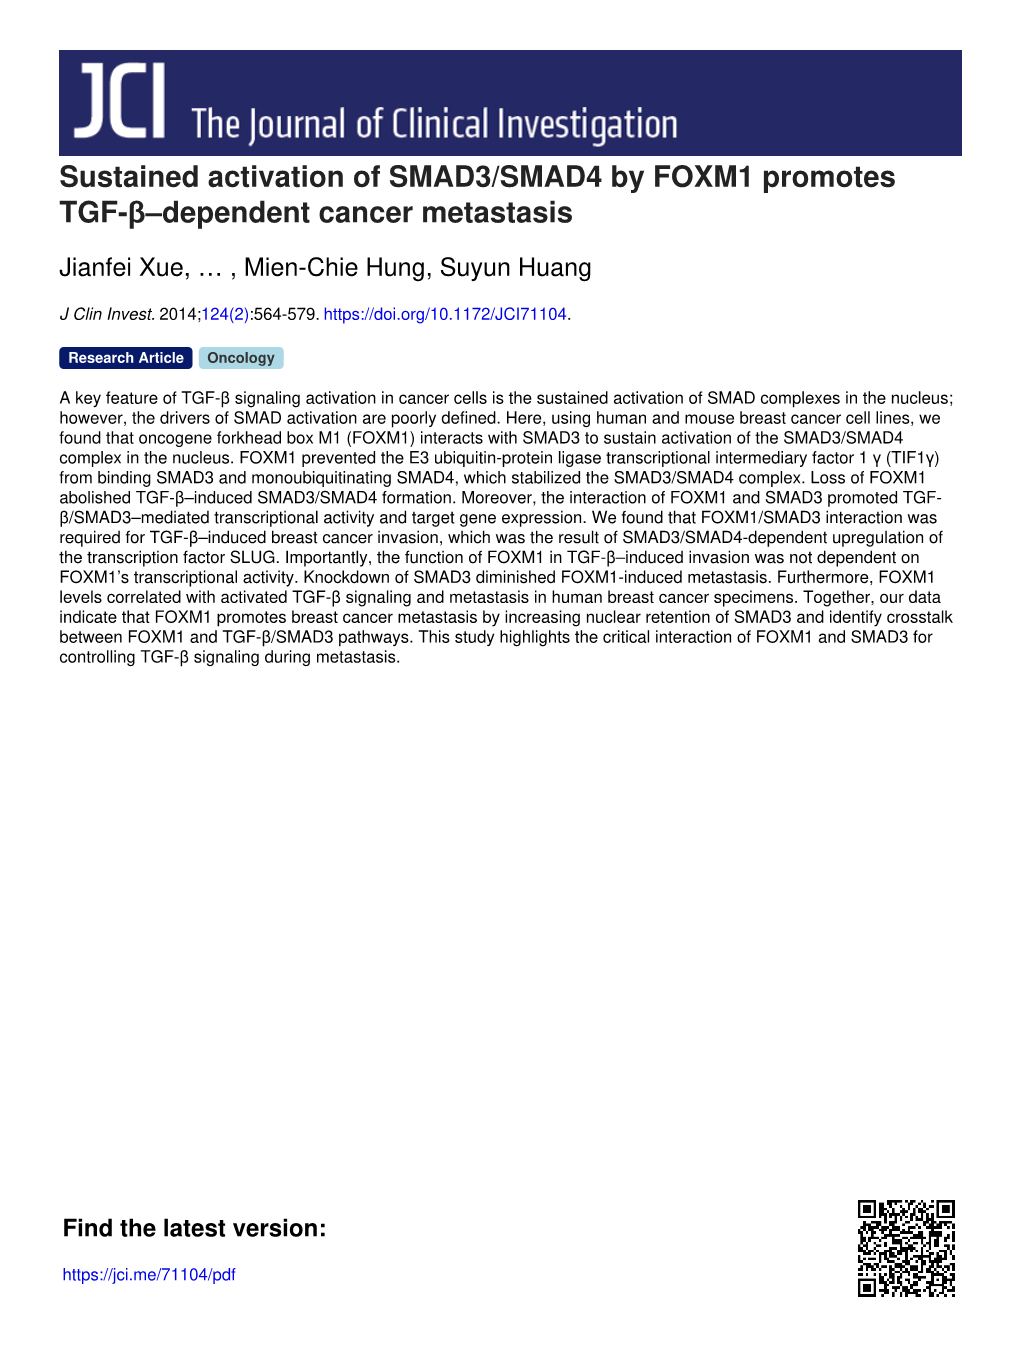 Sustained Activation of SMAD3/SMAD4 by FOXM1 Promotes TGF-Β–Dependent Cancer Metastasis